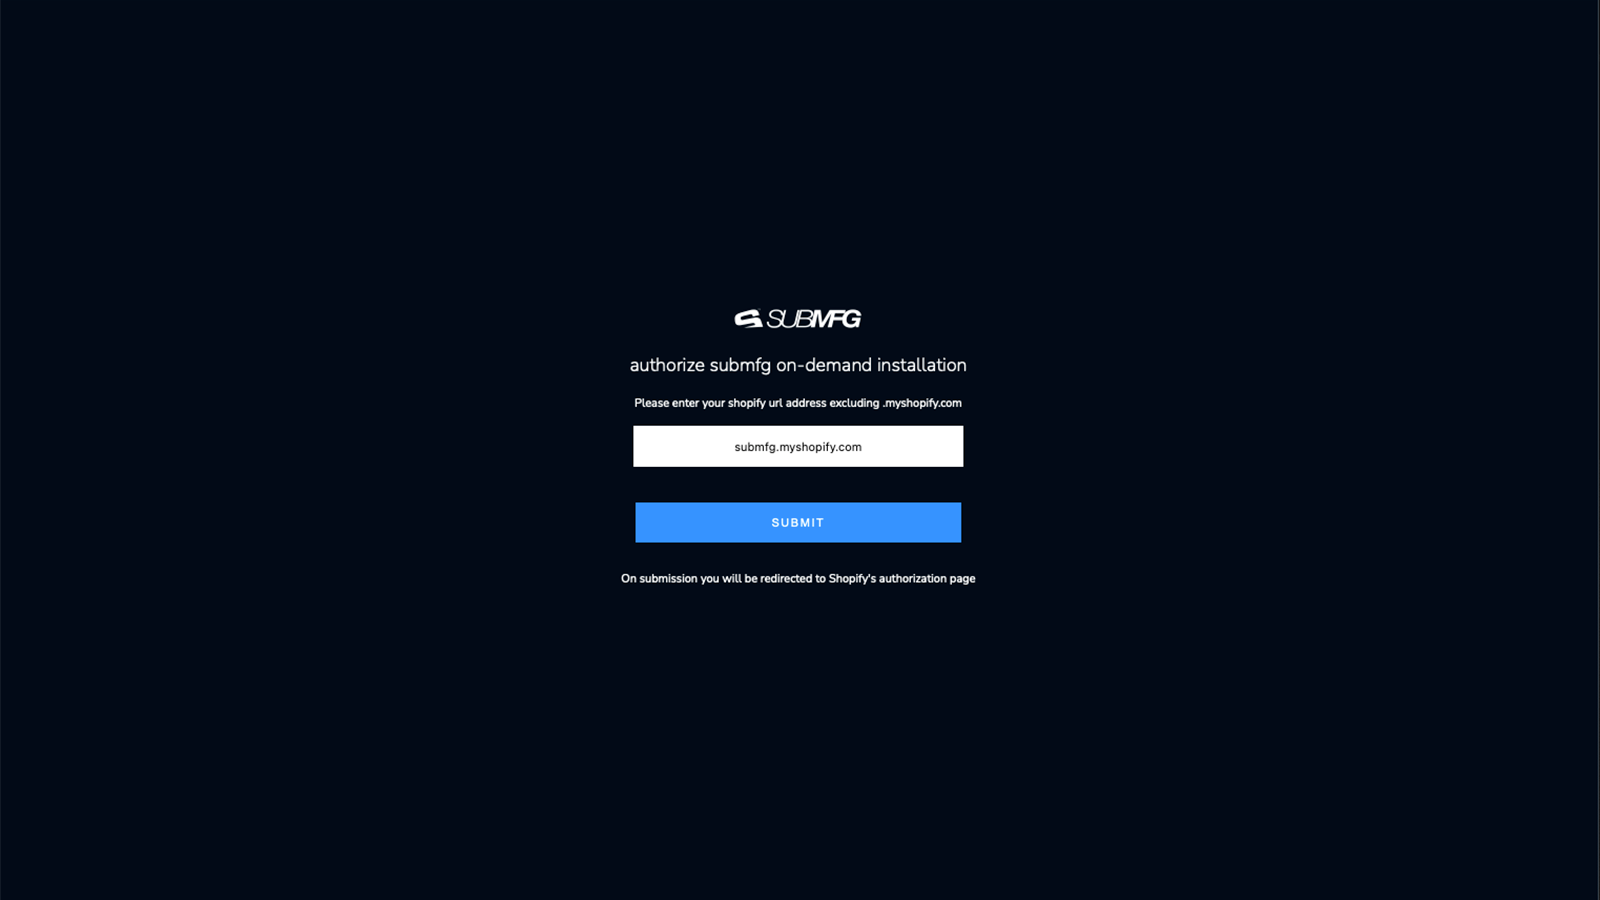 Login to app with MyShopify URL if not already logged in